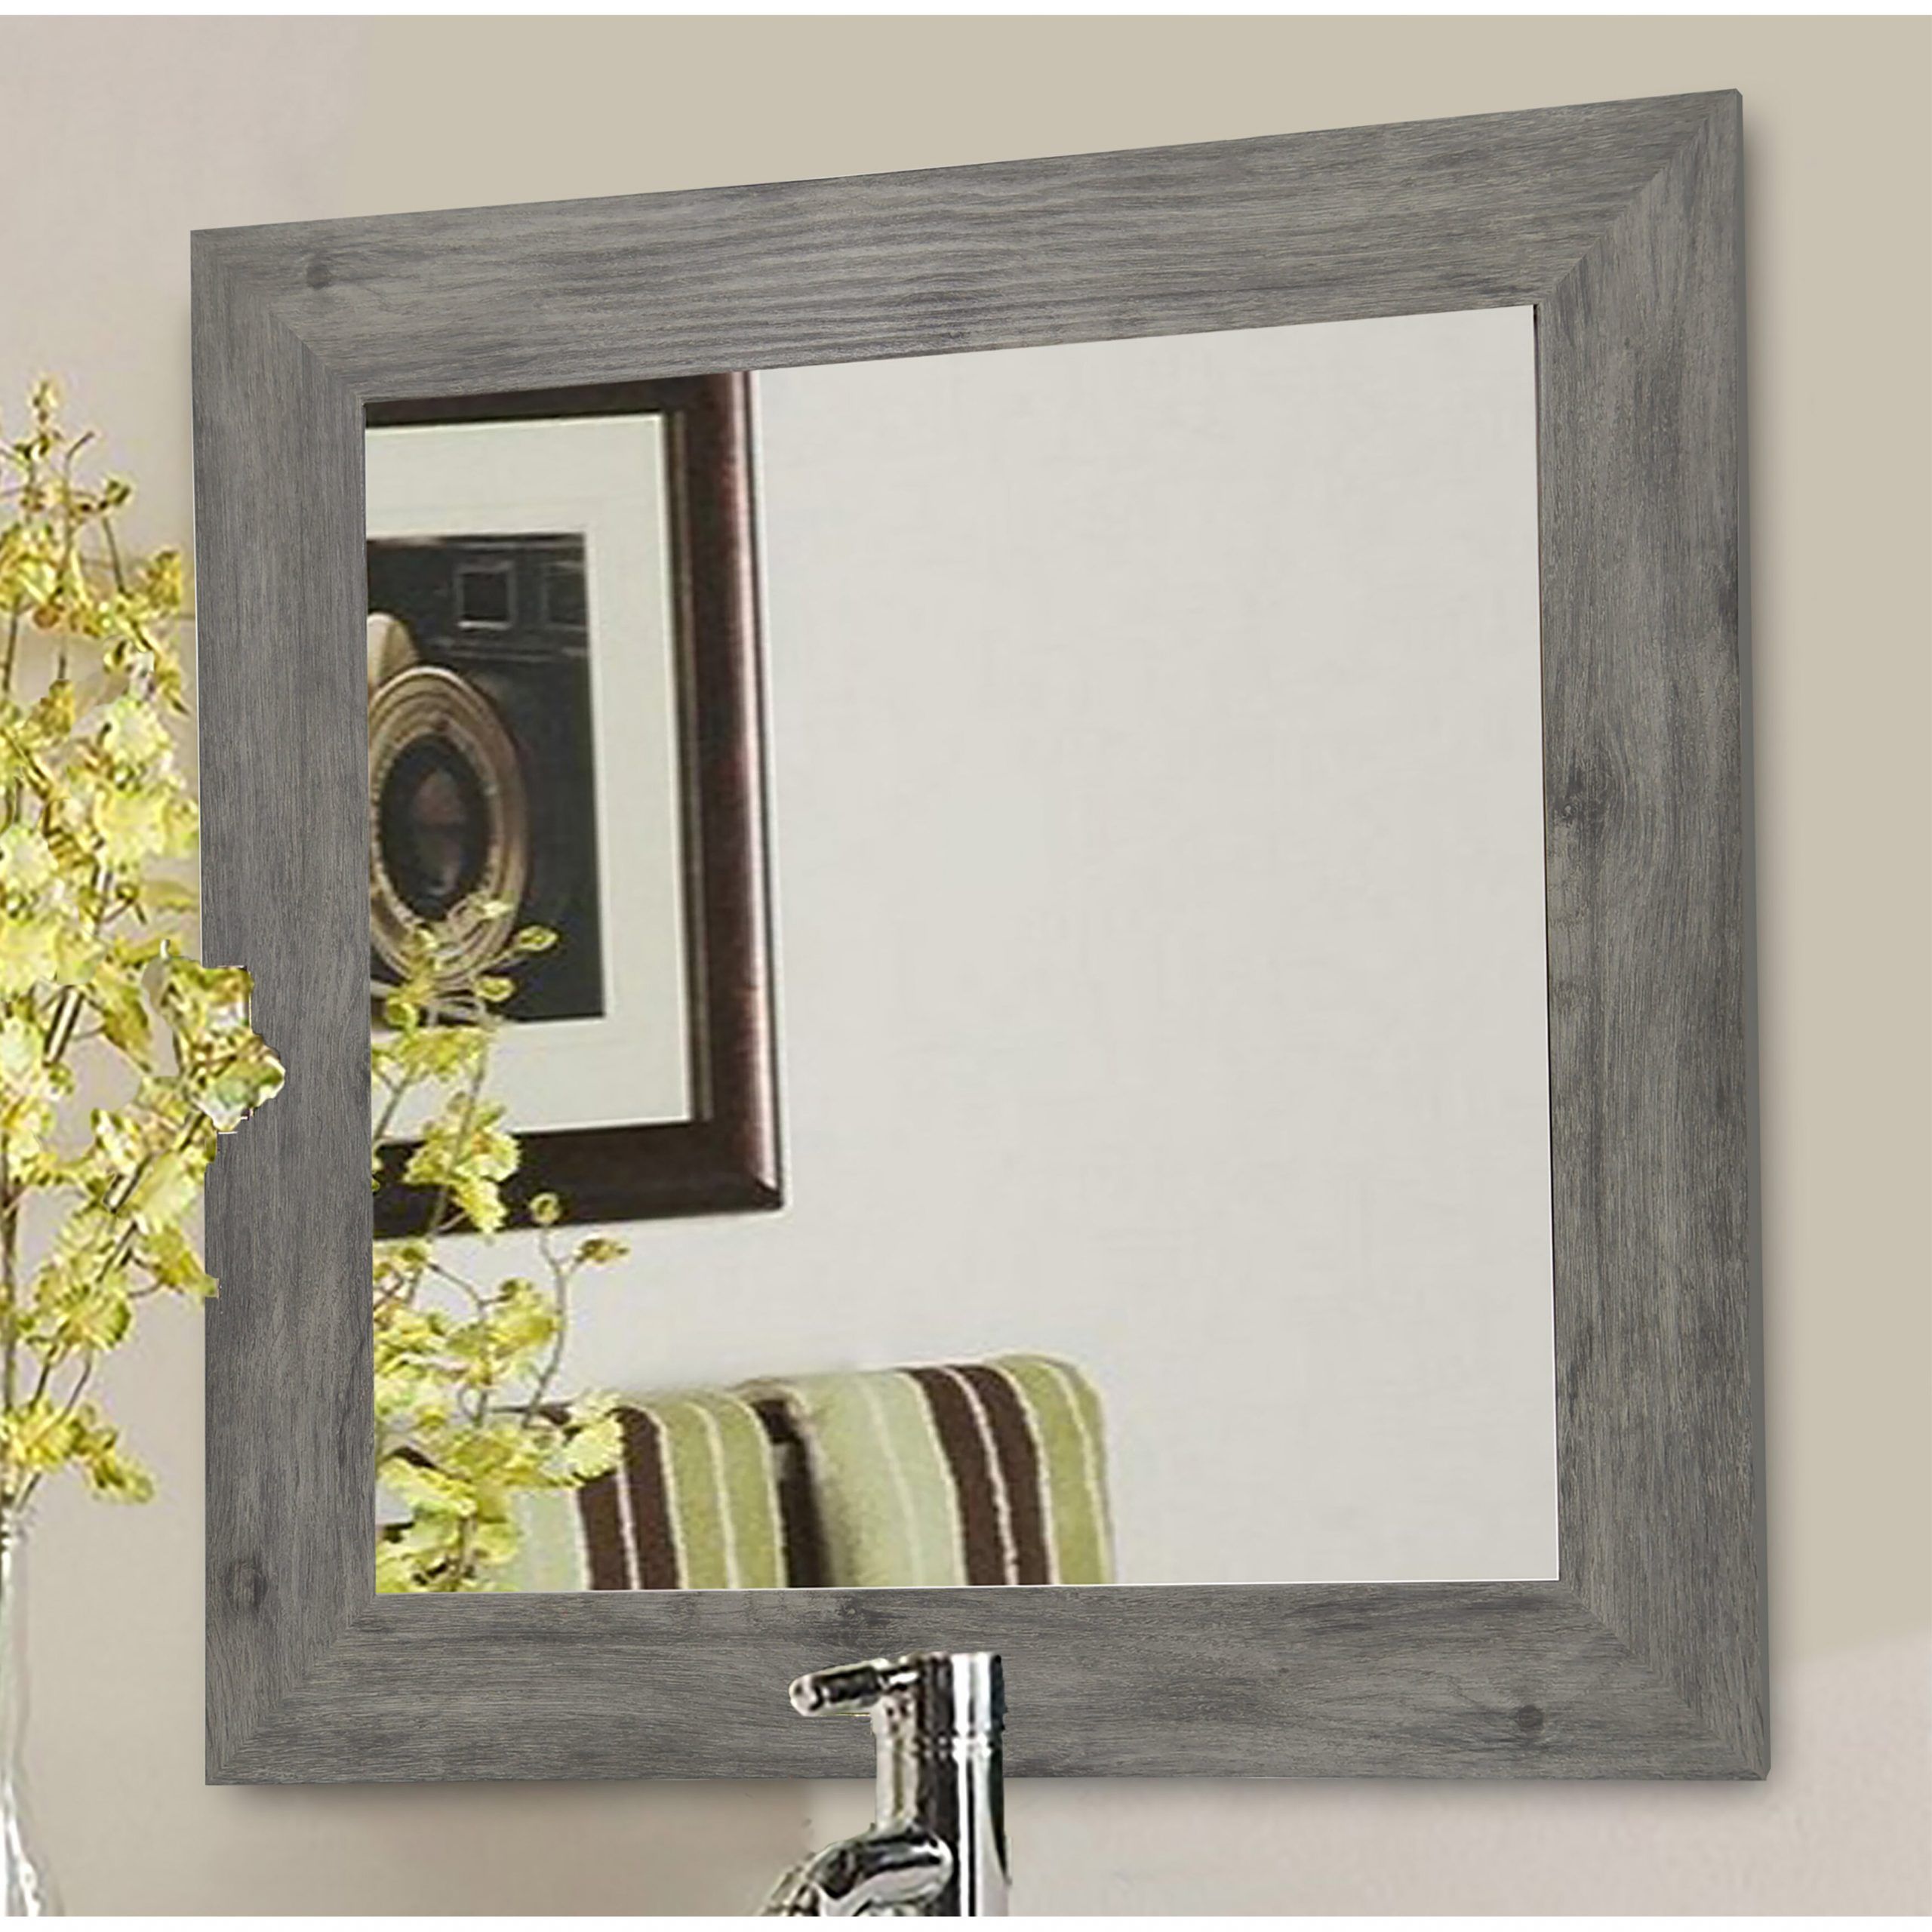 Laurel Foundry Modern Farmhouse Square Grey Wall Mirror & Reviews | Wayfair With Gray Wall Mirrors (View 1 of 15)